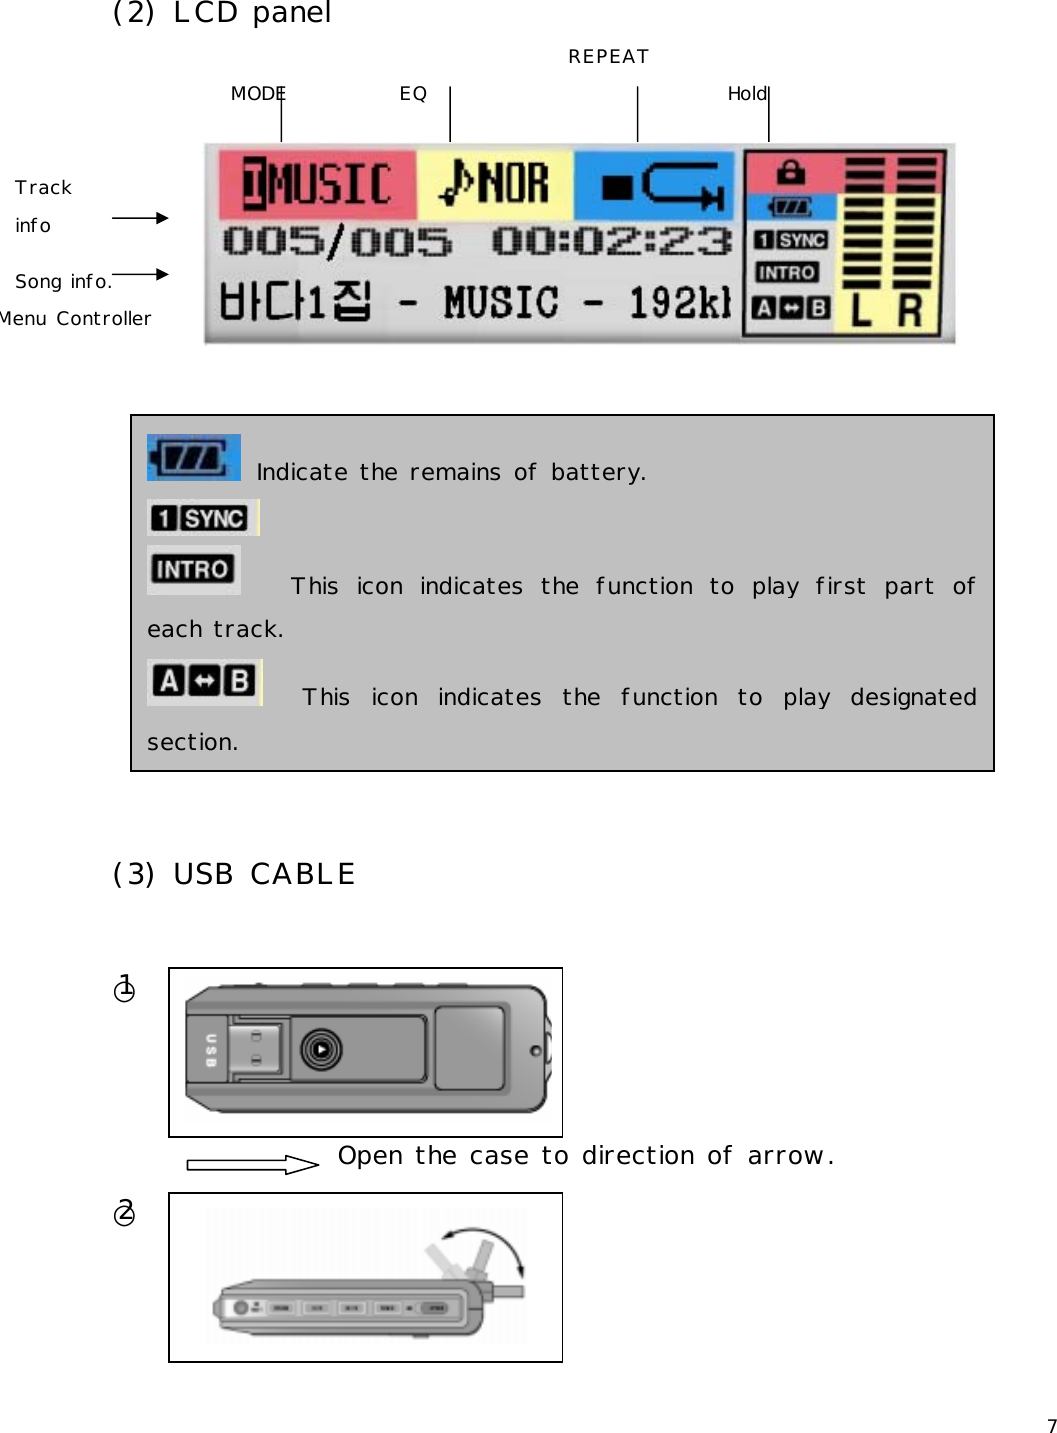 7  (2) LCD panel         (3) USB CABLE   ○1     Open the case to direction of arrow. ○2    Indicate the remains of battery.      This icon indicates the function to play first part of each track.   This icon indicates the function to play designated section.   MODE   EQ  REPEAT Hold Track info  Song info. Menu Controller    